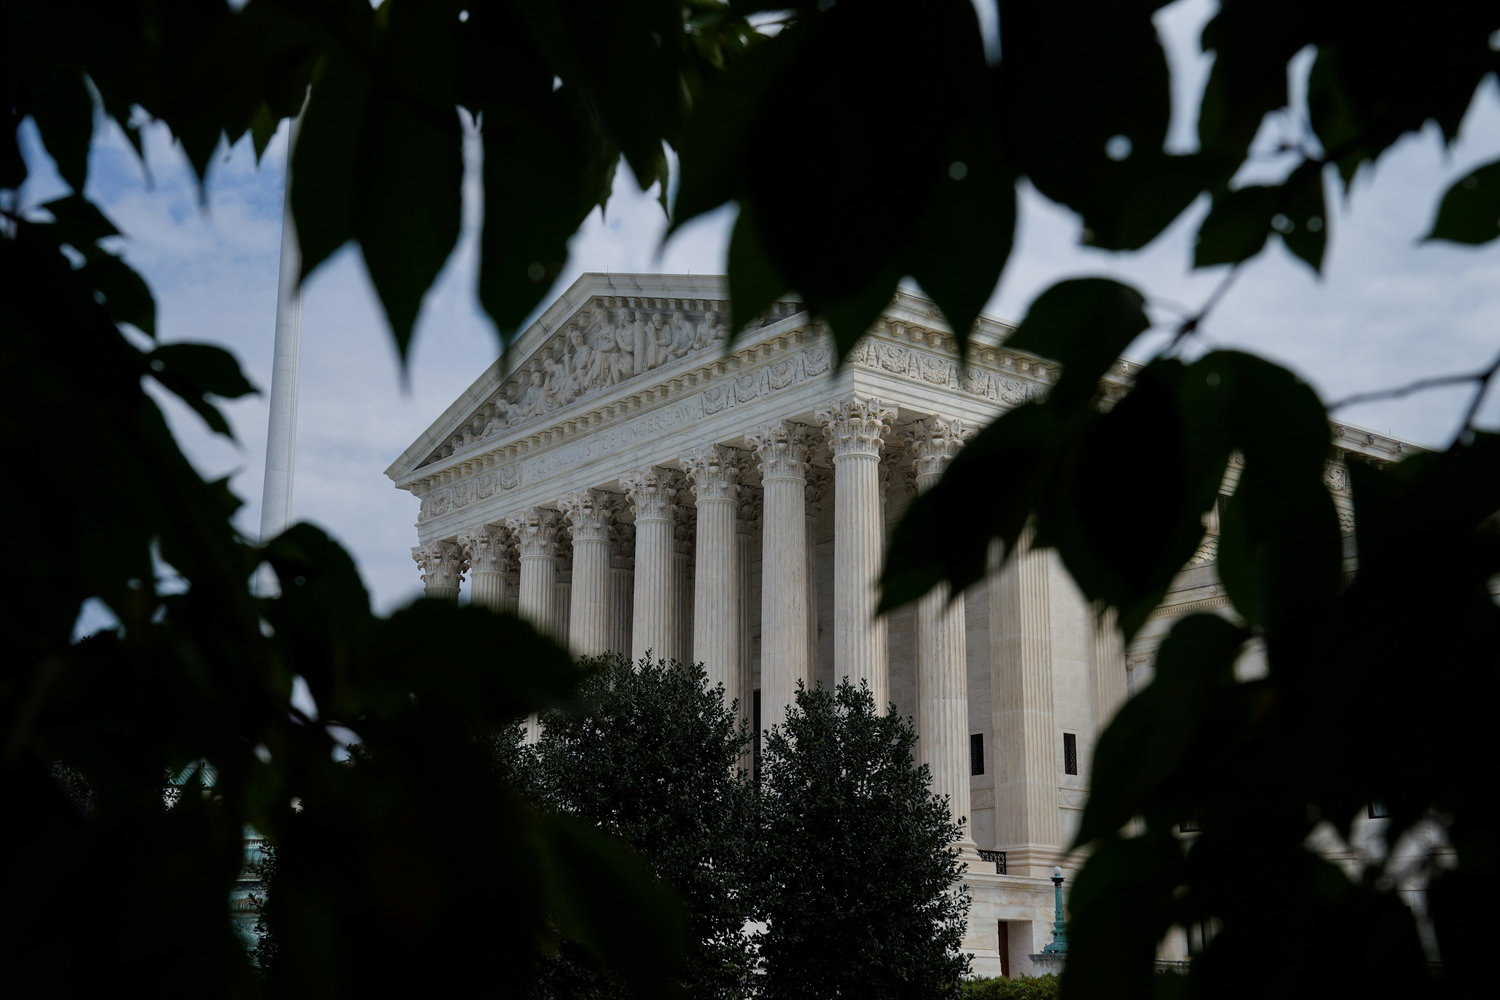 The exterior of the U.S. Supreme Court in Washington is seen Sept. 16, 2019.